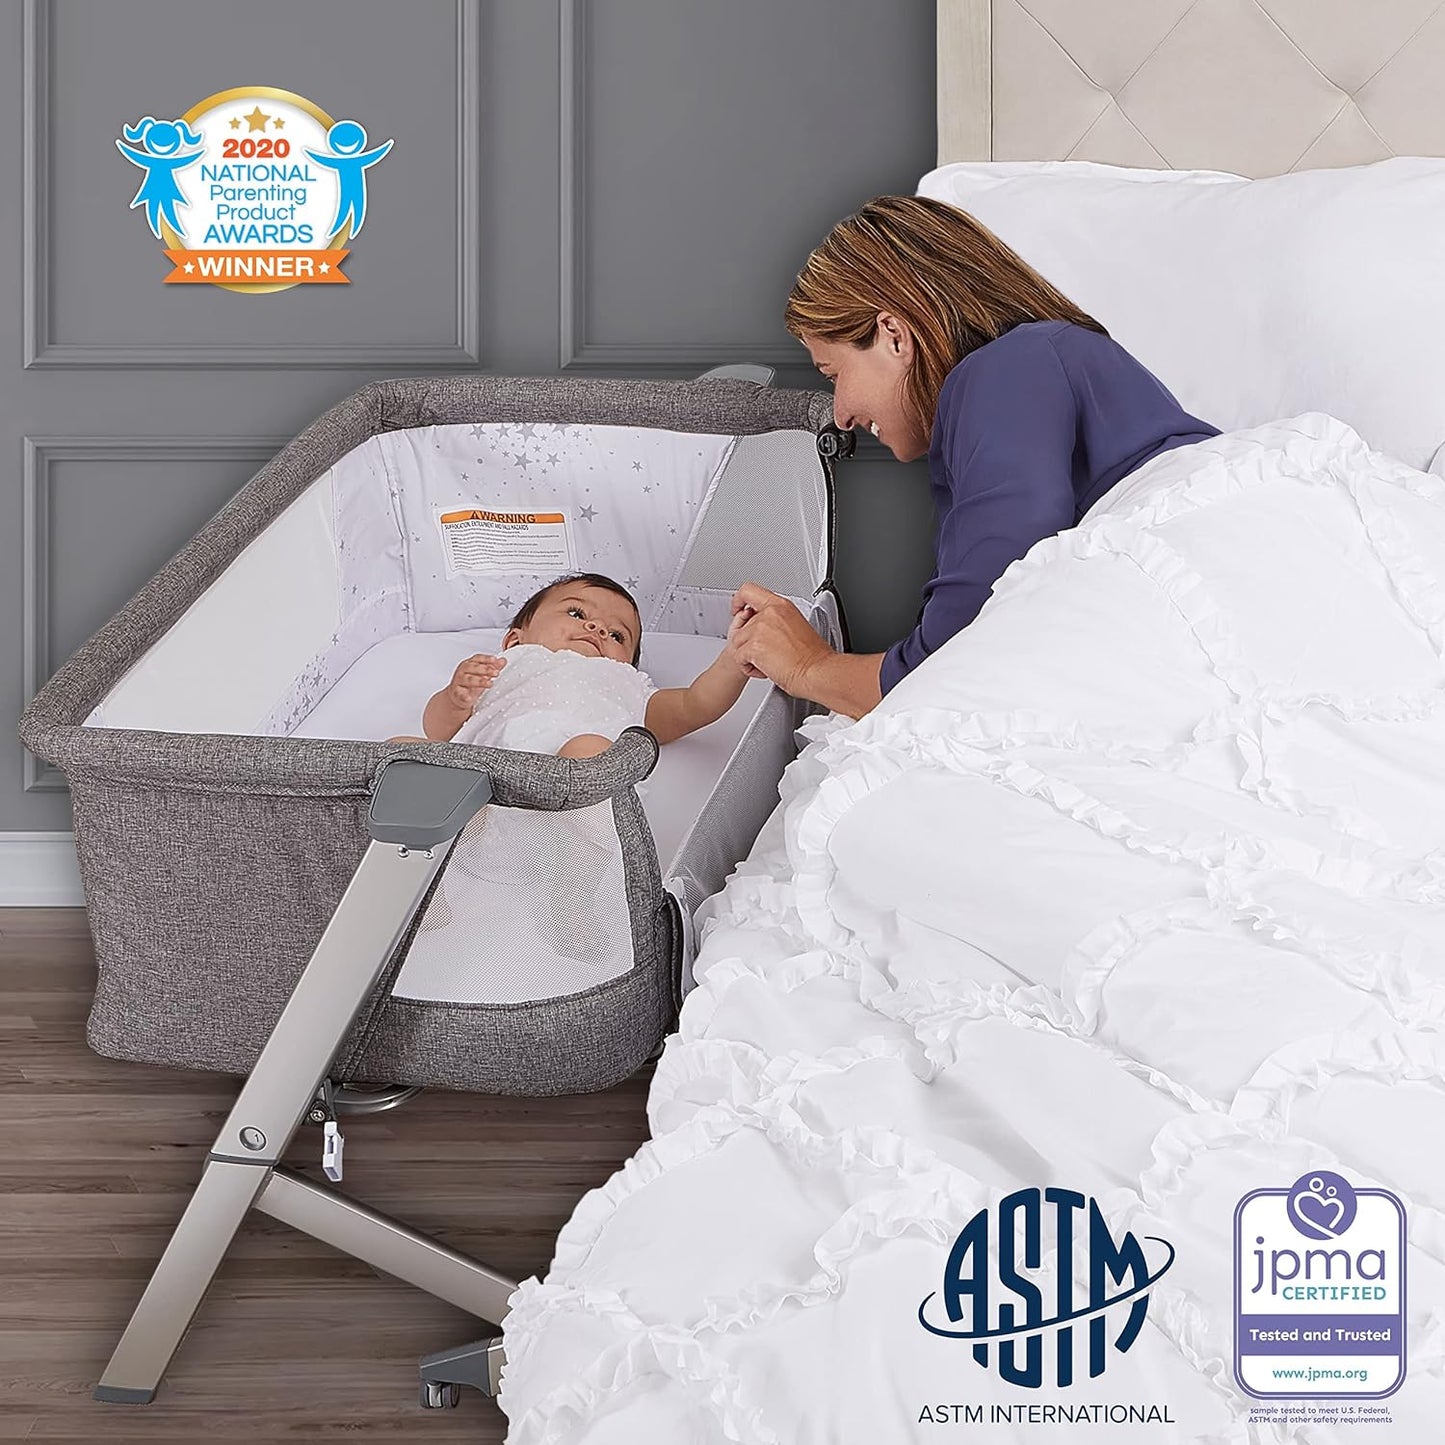 Dream On Me Skylar Bassinet and Bedside Sleeper in Grey, Lightweight and Portable Baby Bassinet, Five Position Adjustable Height, Easy to Fold and Carry Travel Bassinet, JPMA Certified